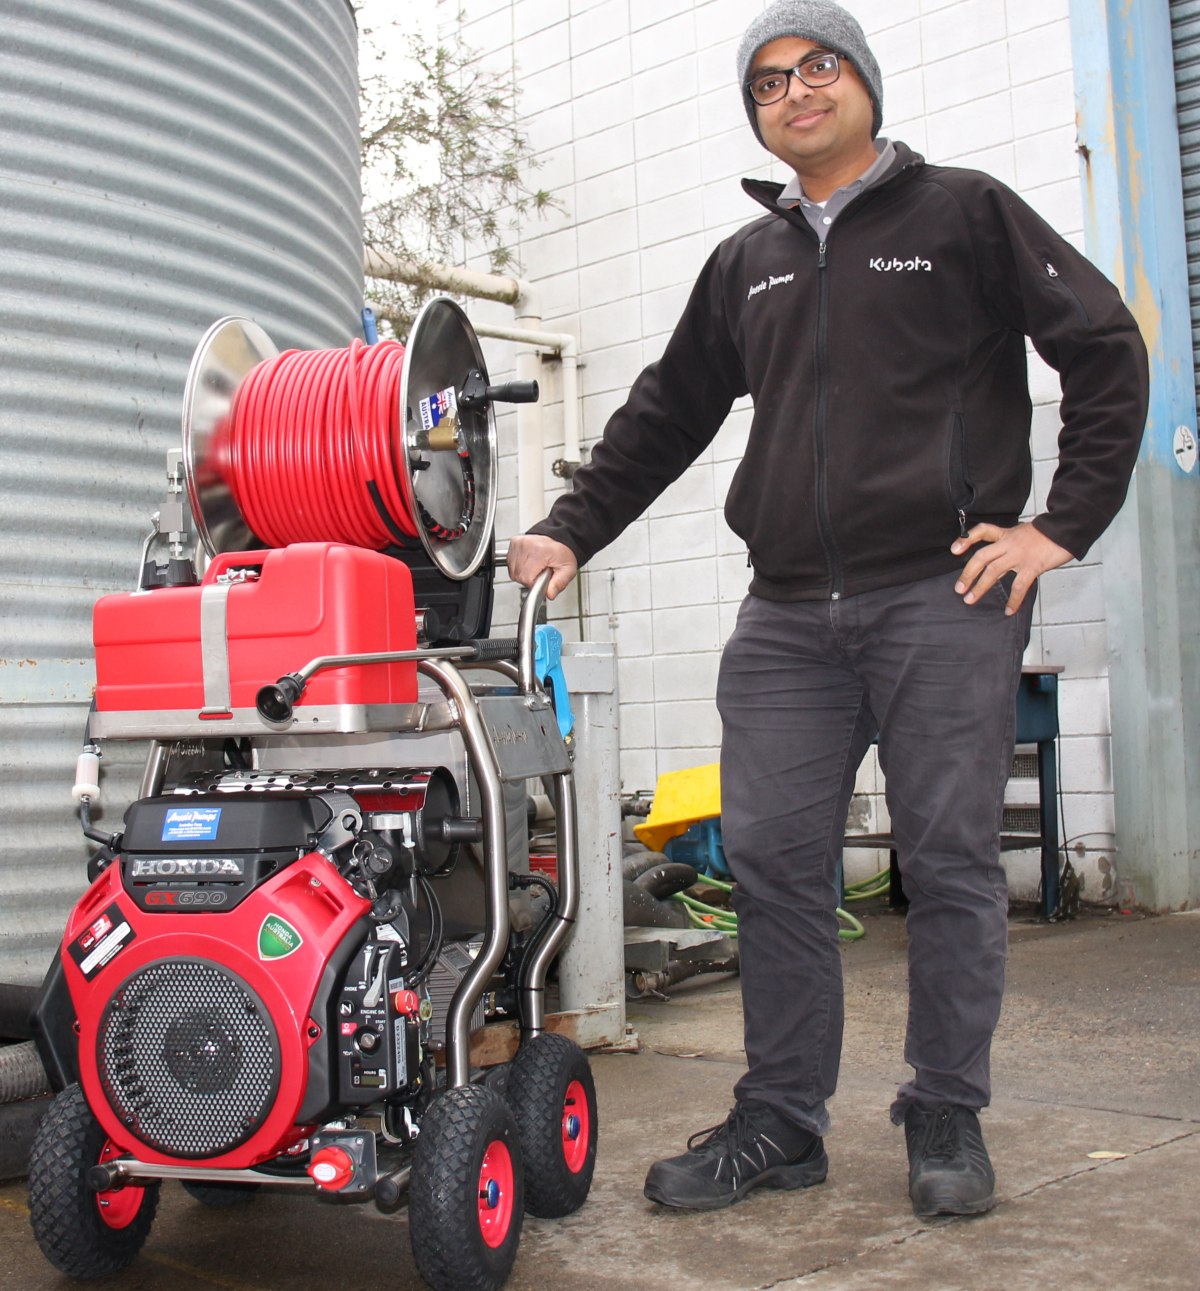 Aussie Deluxe Jetter for use by MPAQ for training operators